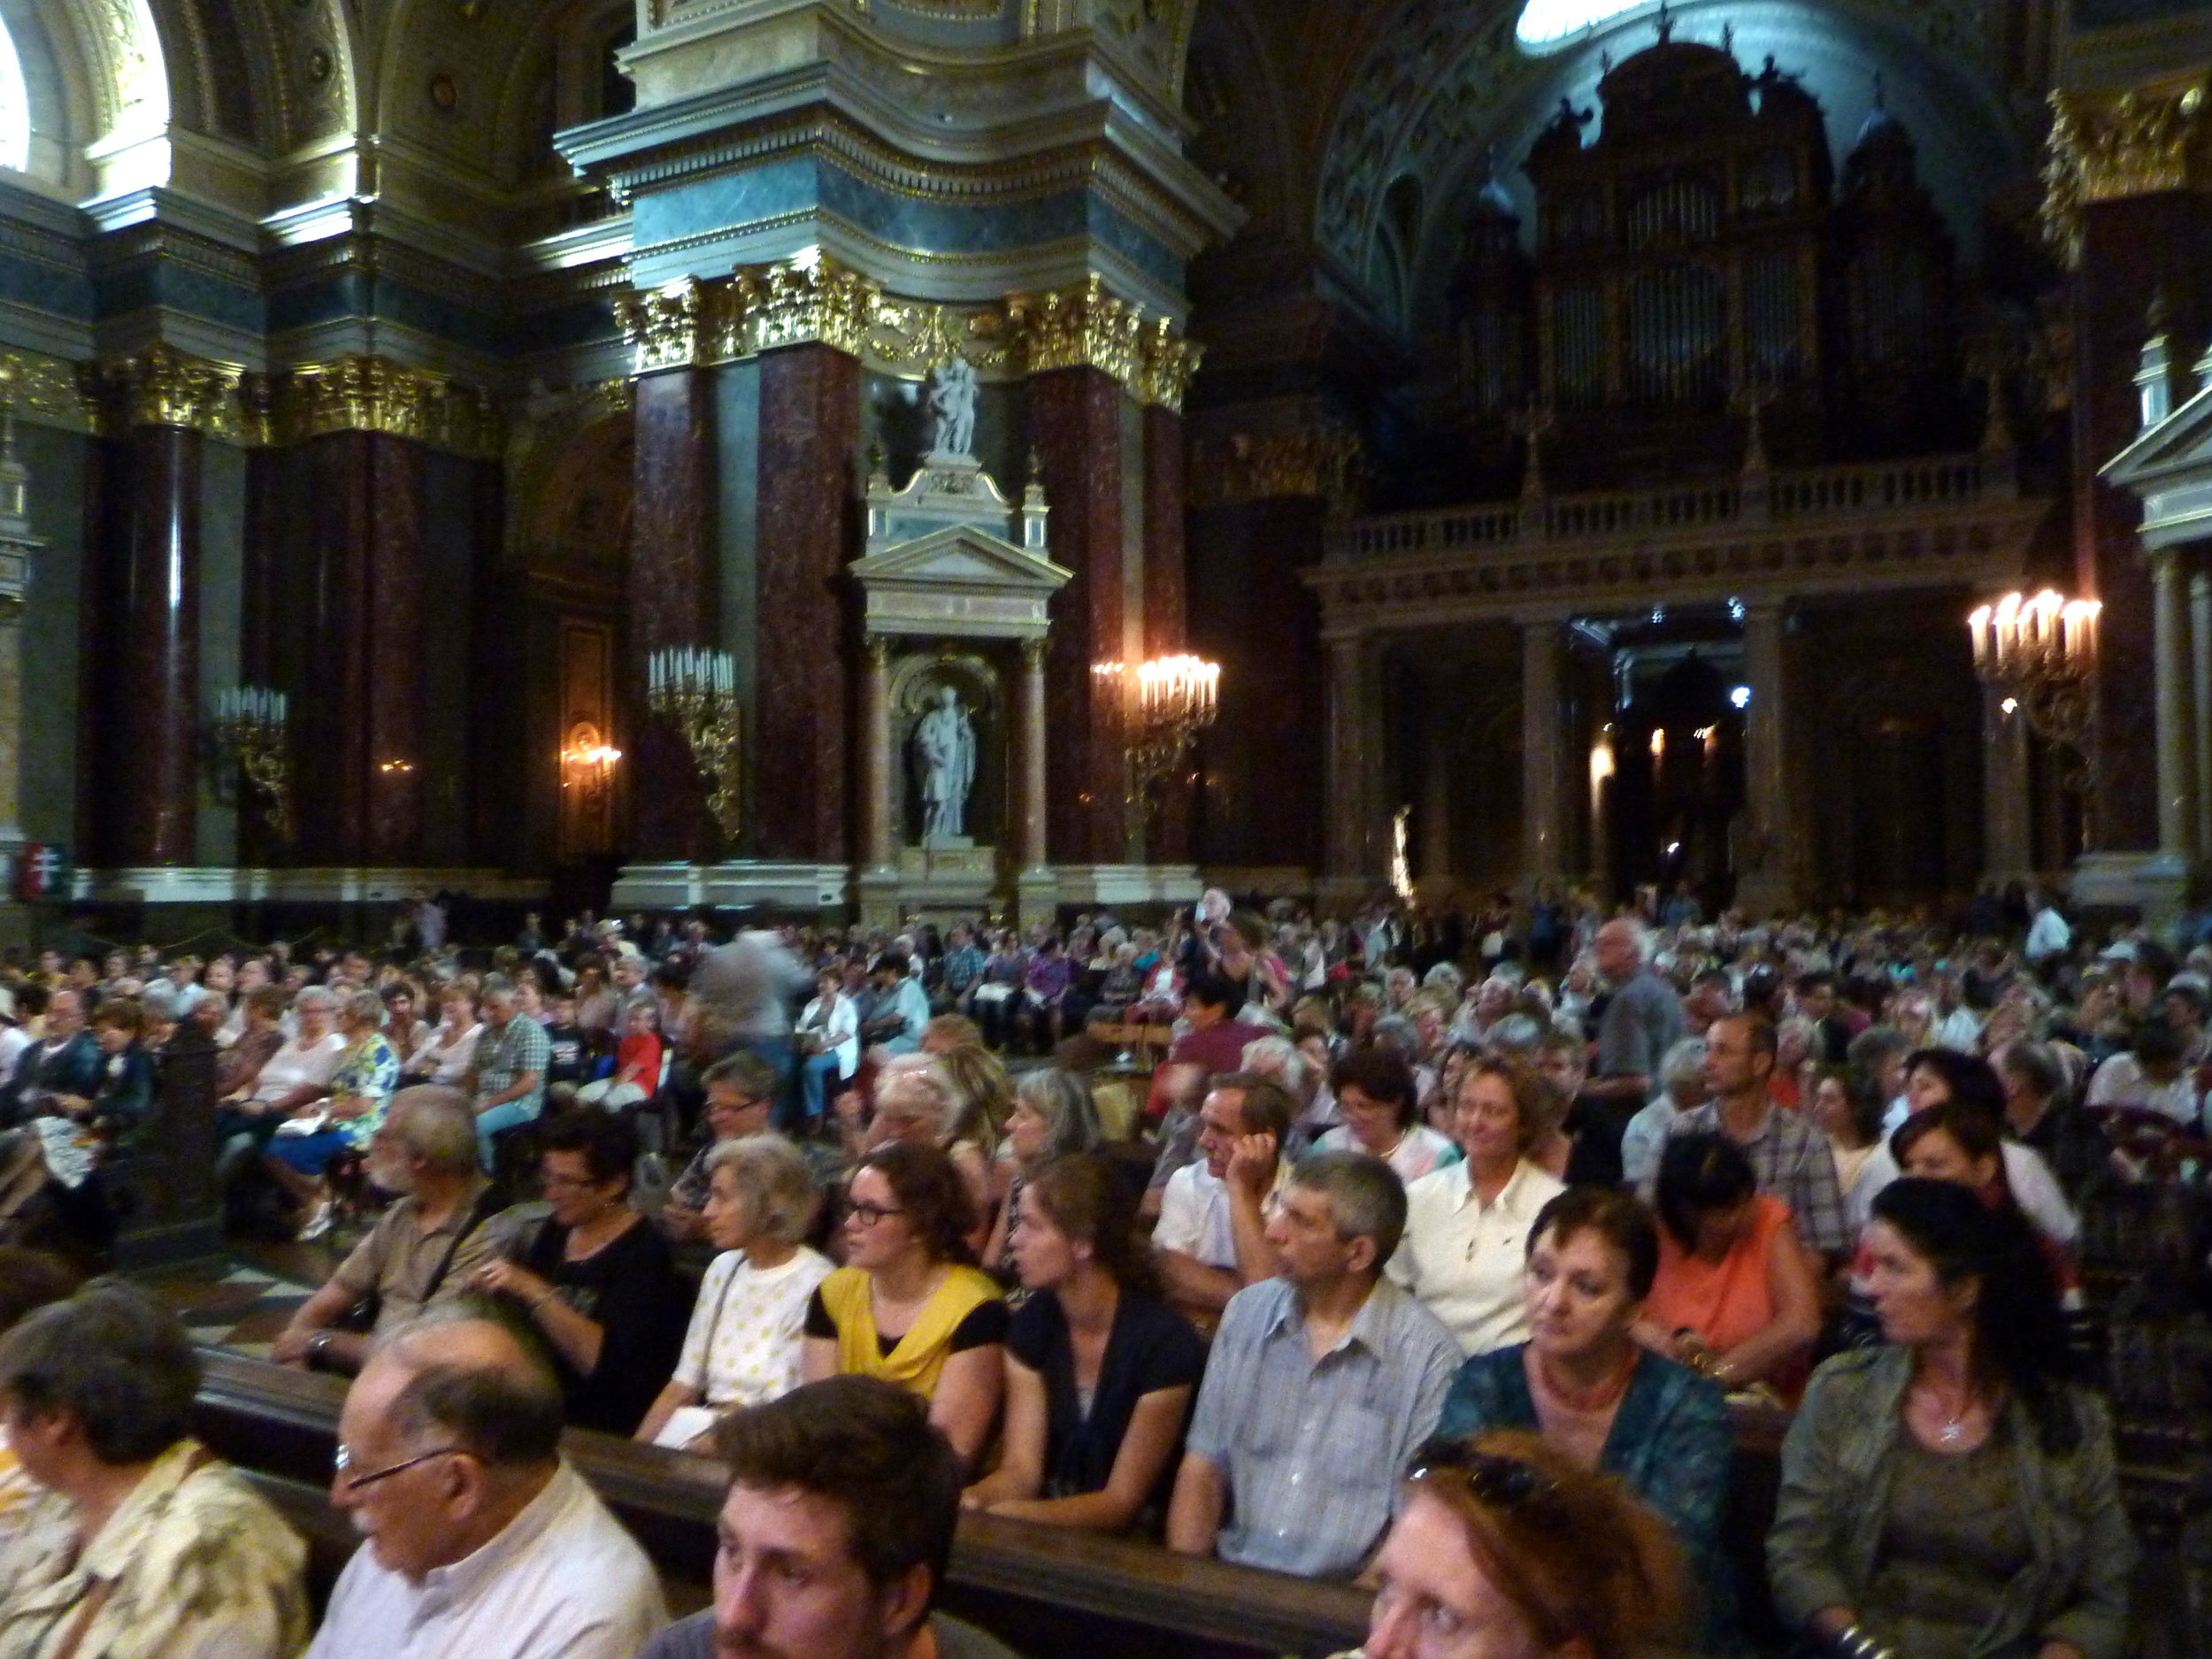 Audience is arriving for Metropolitan Flute Orchestra concert at St. Stephen's Basilica in Budapest, Hungary